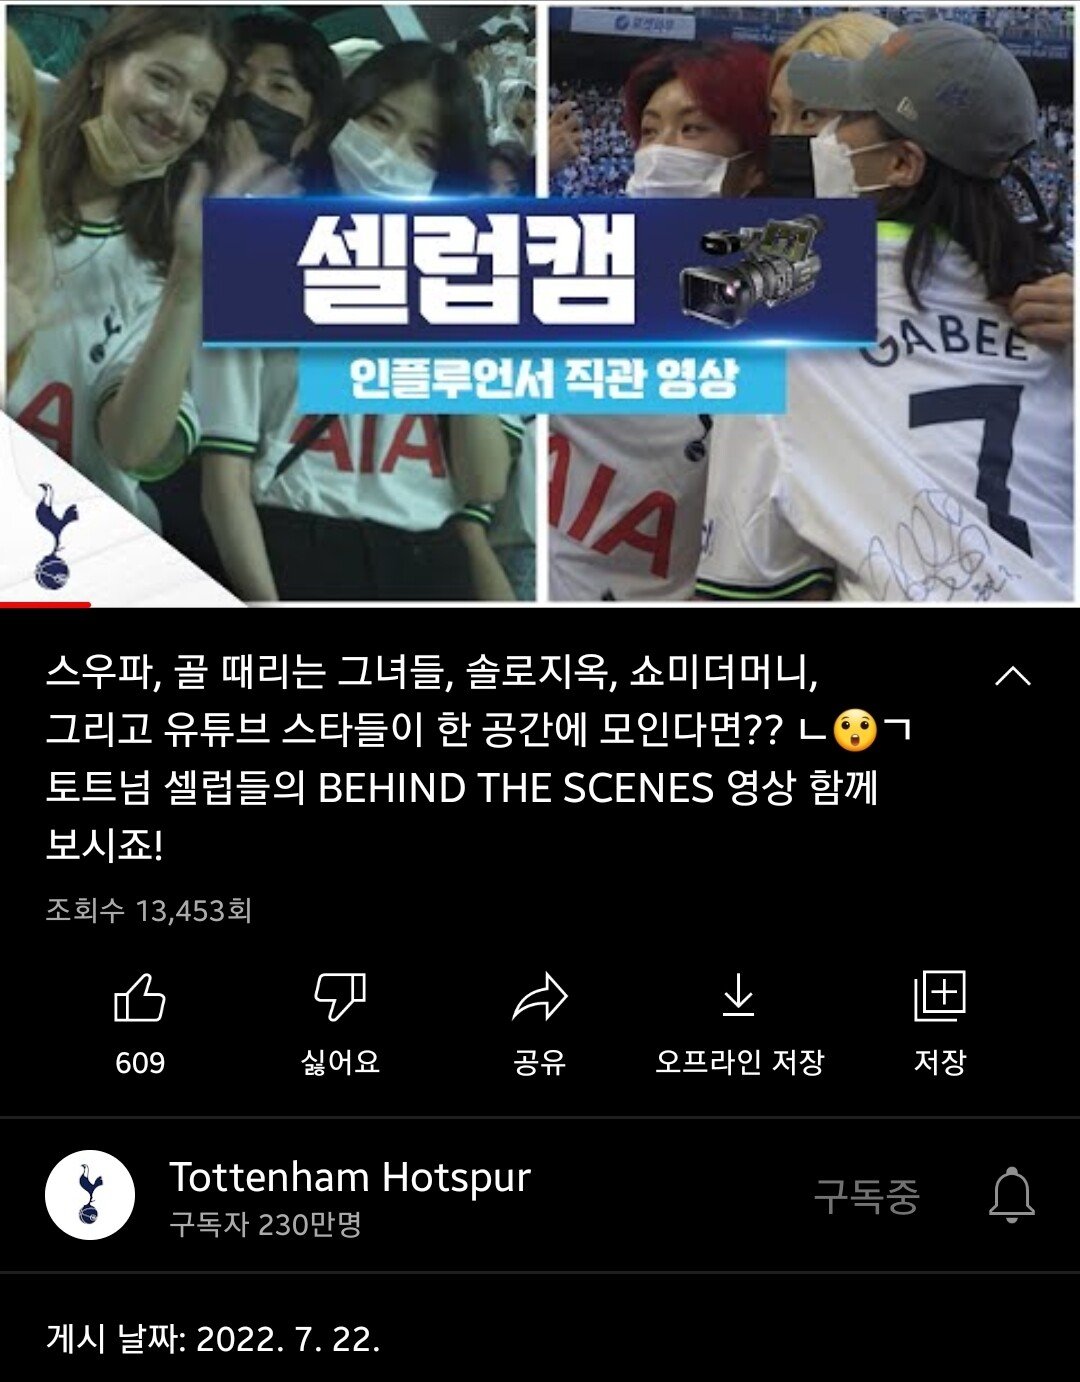 Currently, comments are saying, "Tottenham Youtube with tripe".jpg